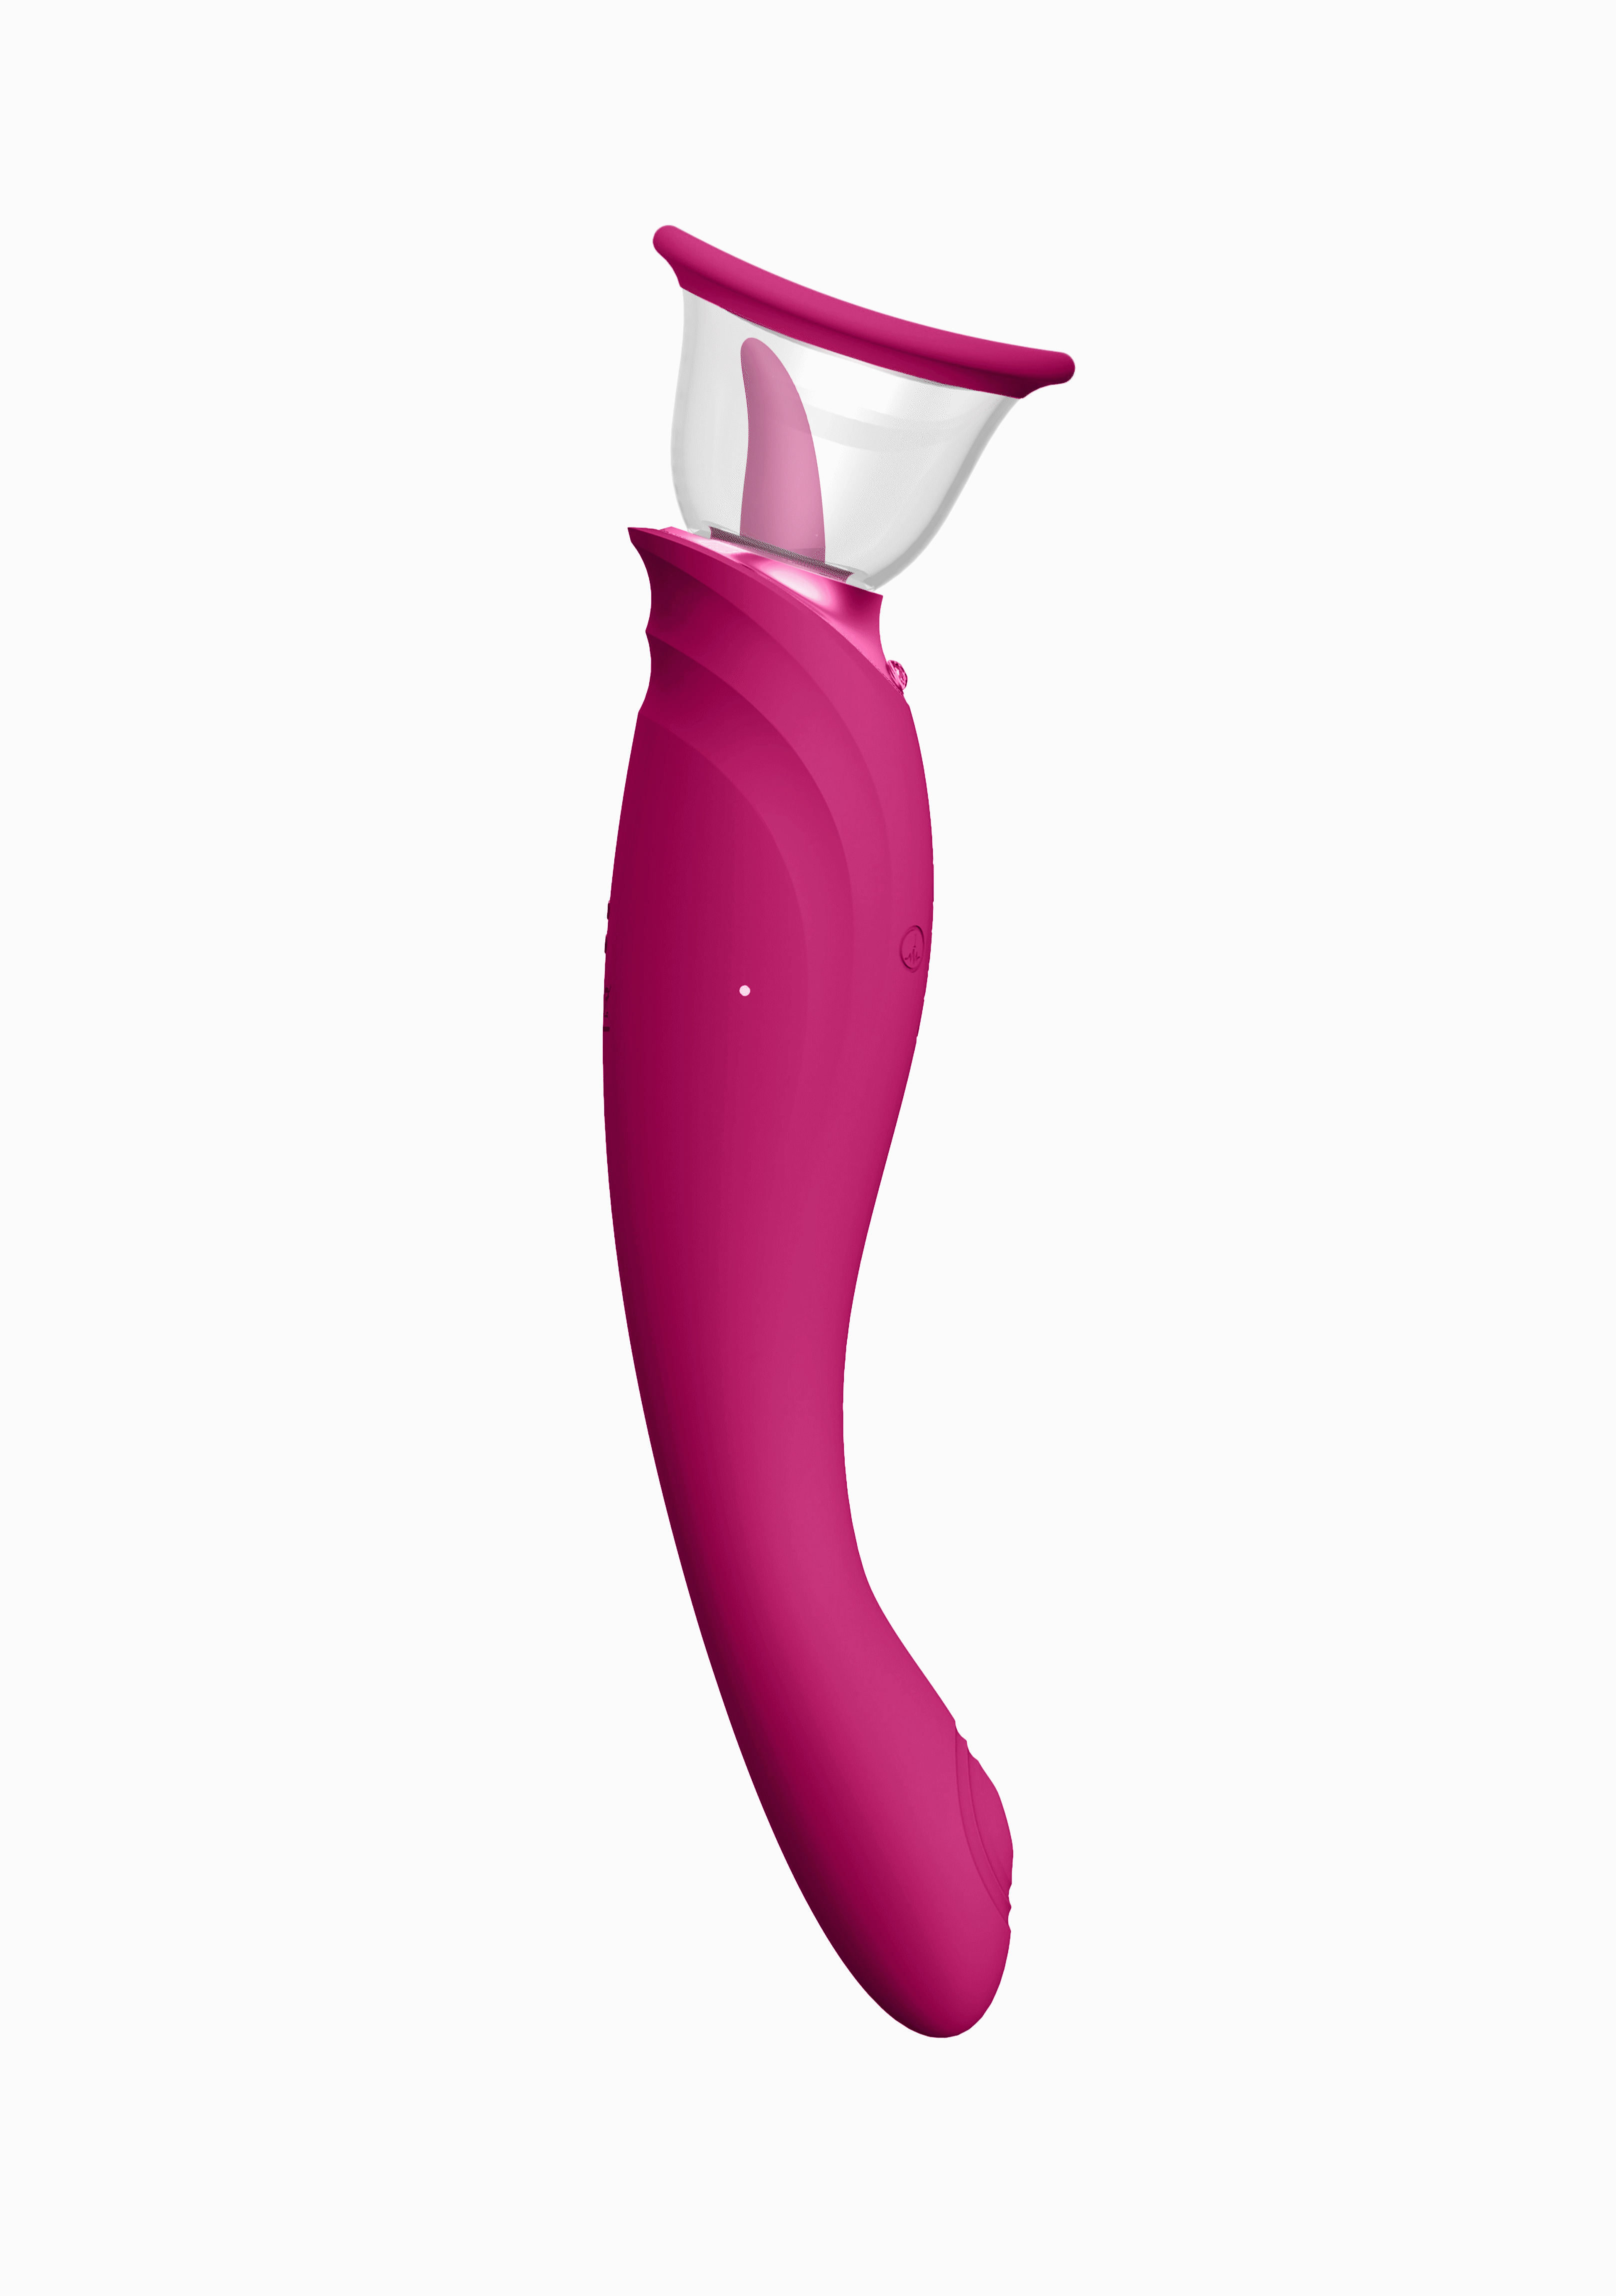 Vive - Mai Suction, Swirling, Pulsing & Air Wave Multi Vibe